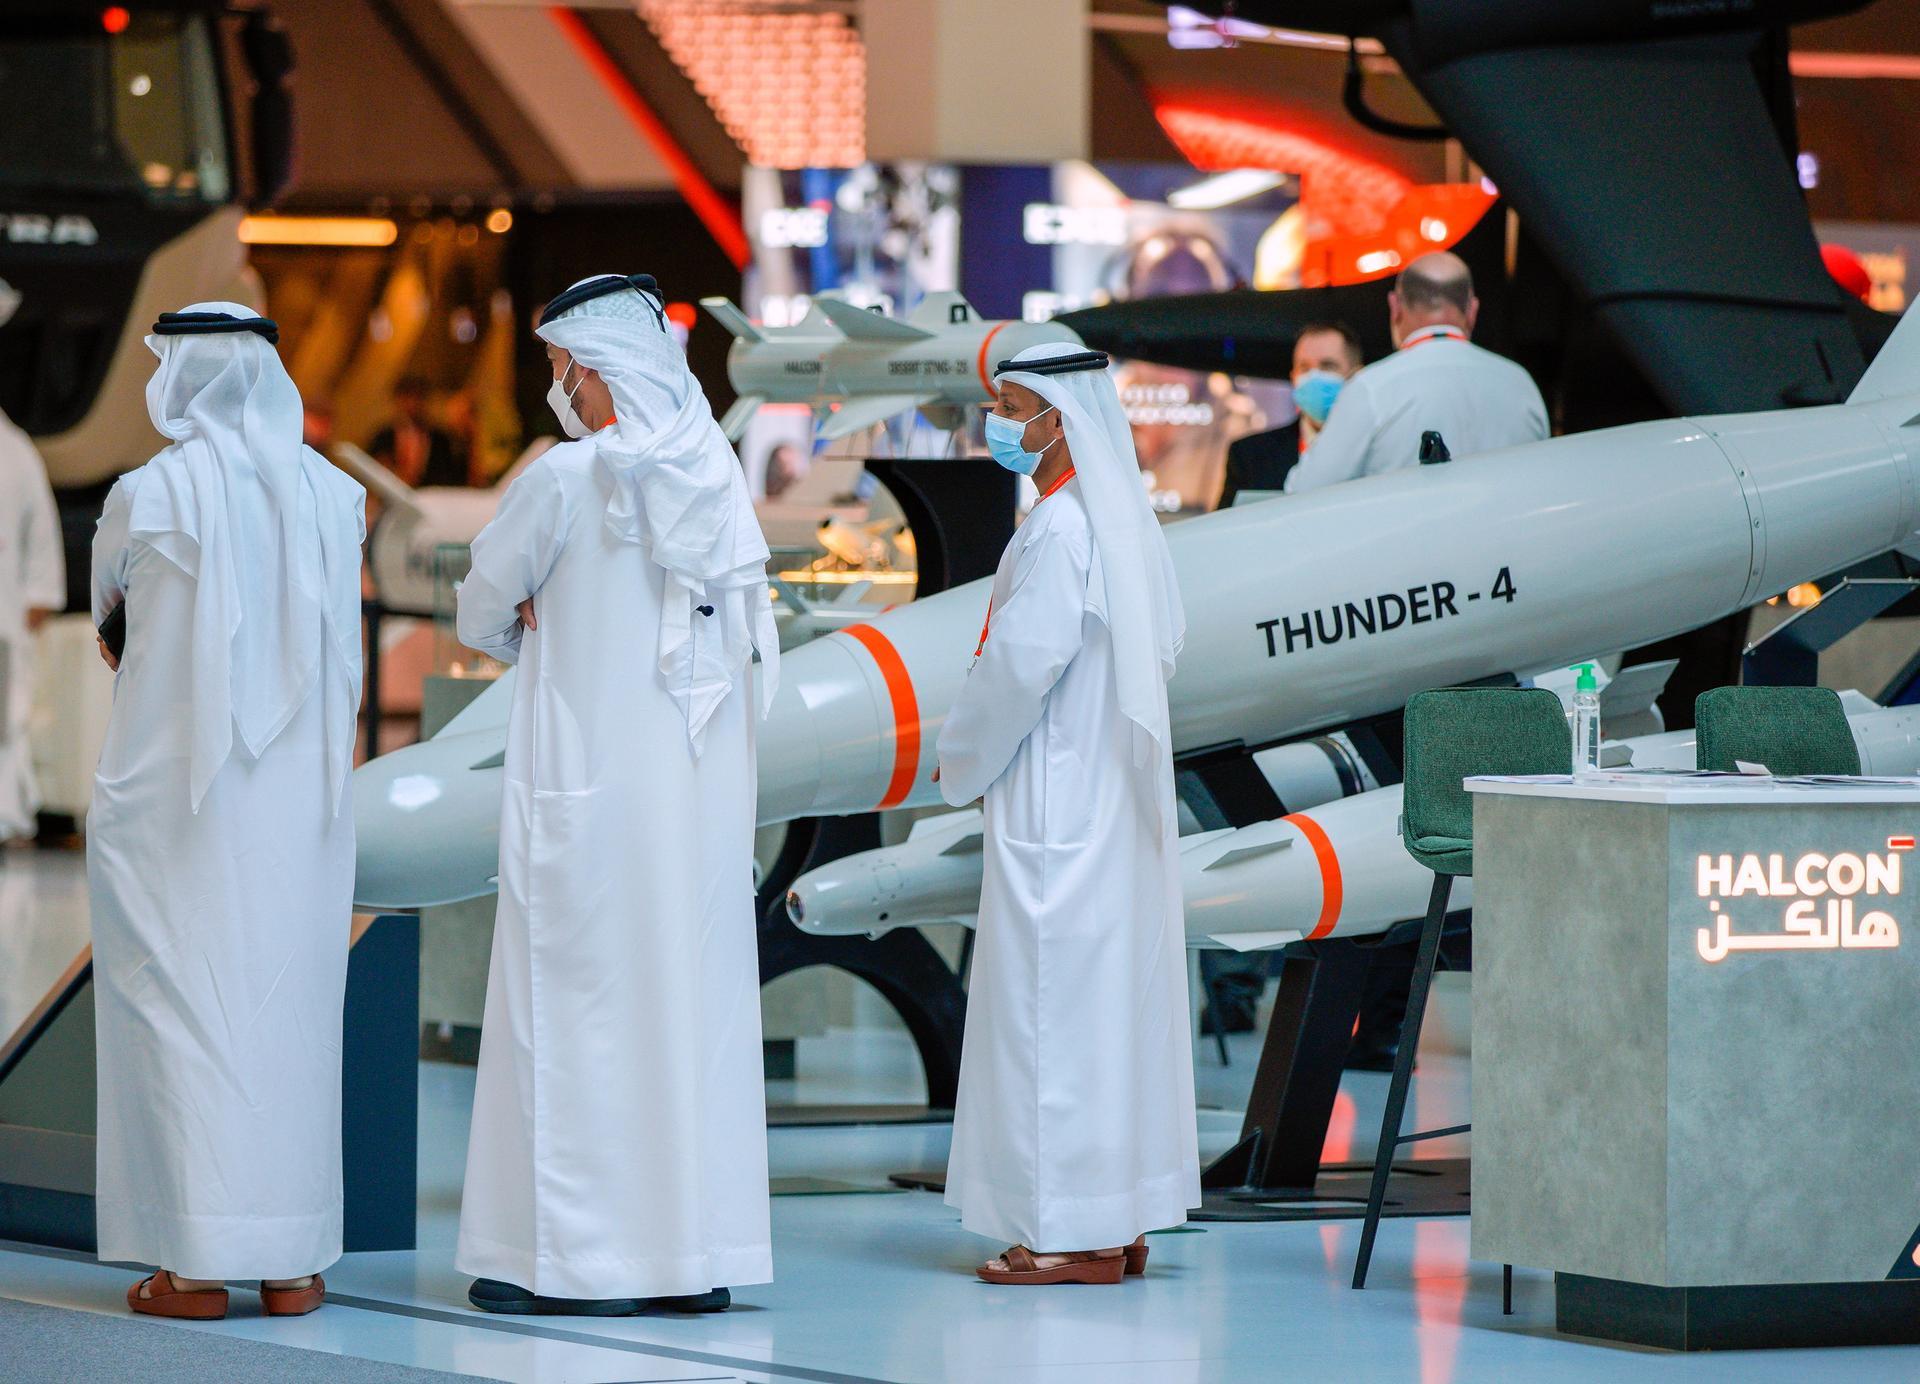 Abu Dhabi, United Arab Emirates, February 22, 2021.  Idex 2021 Day 2.Visitors inspect the Thunder-4 at the Halcon stand.Victor Besa / The NationalSection:  NA